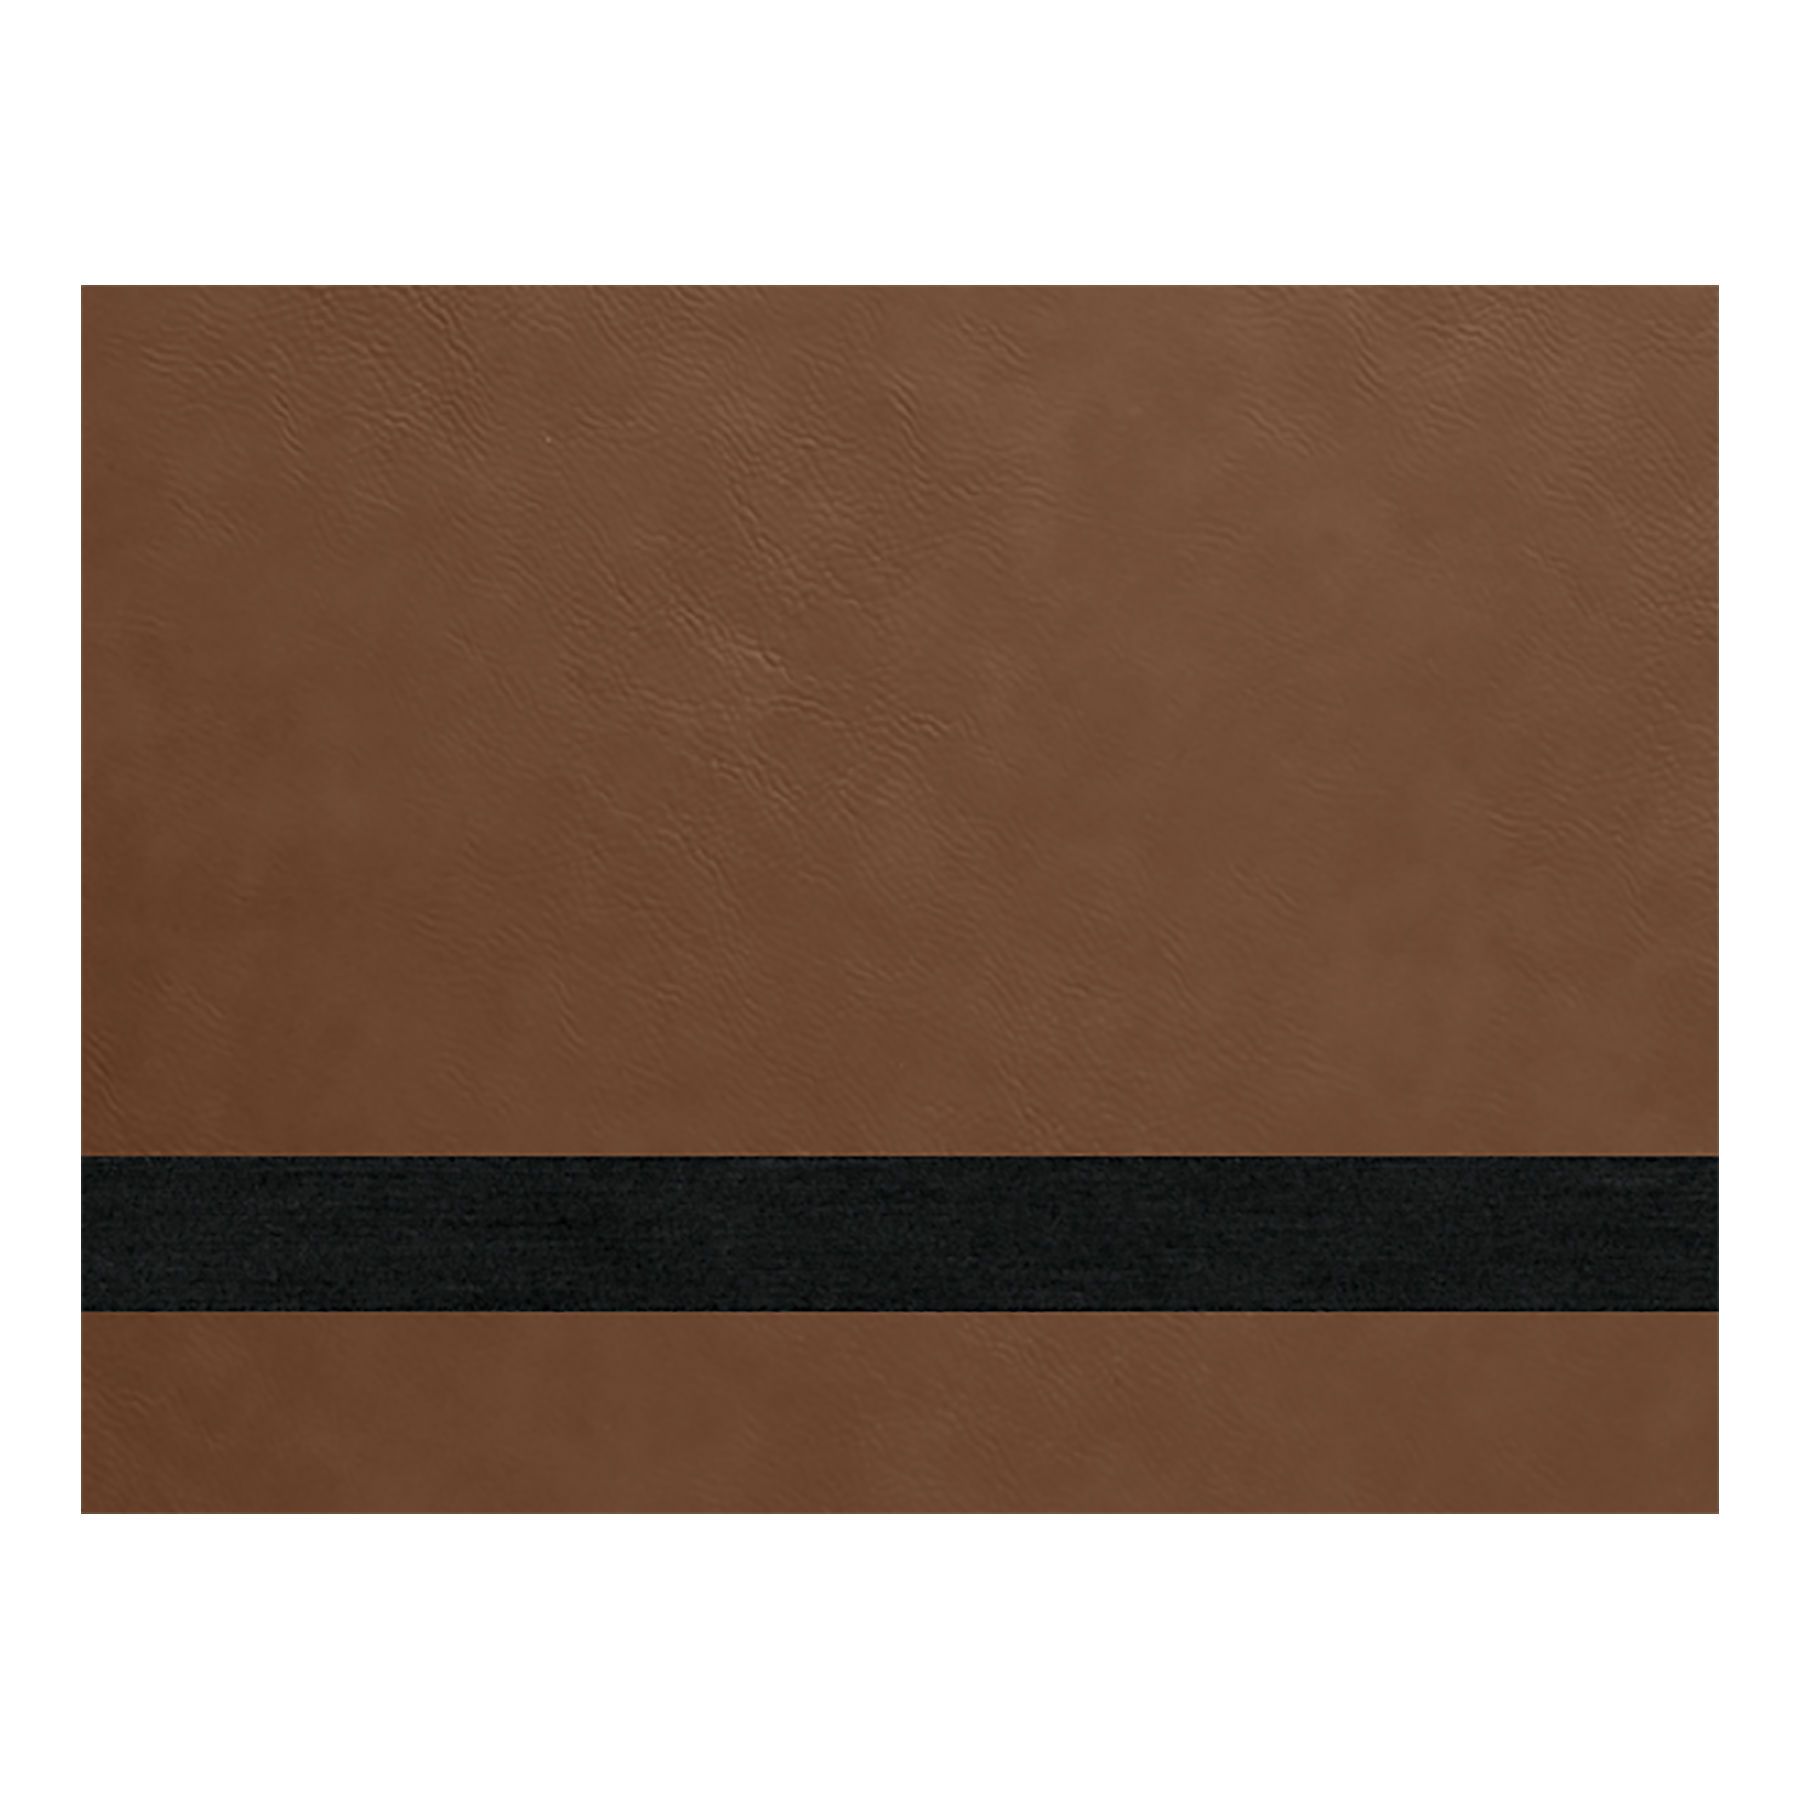 PRE-ORDER! Full Size Laserable Leatherette Sheet Stock, Epilog Fusion Pro Laser Engravers (Available Jan. 2022) Engraving Supplies Craftworks NW Fusion Pro 24 (24" x 24") Dark Brown/Black 